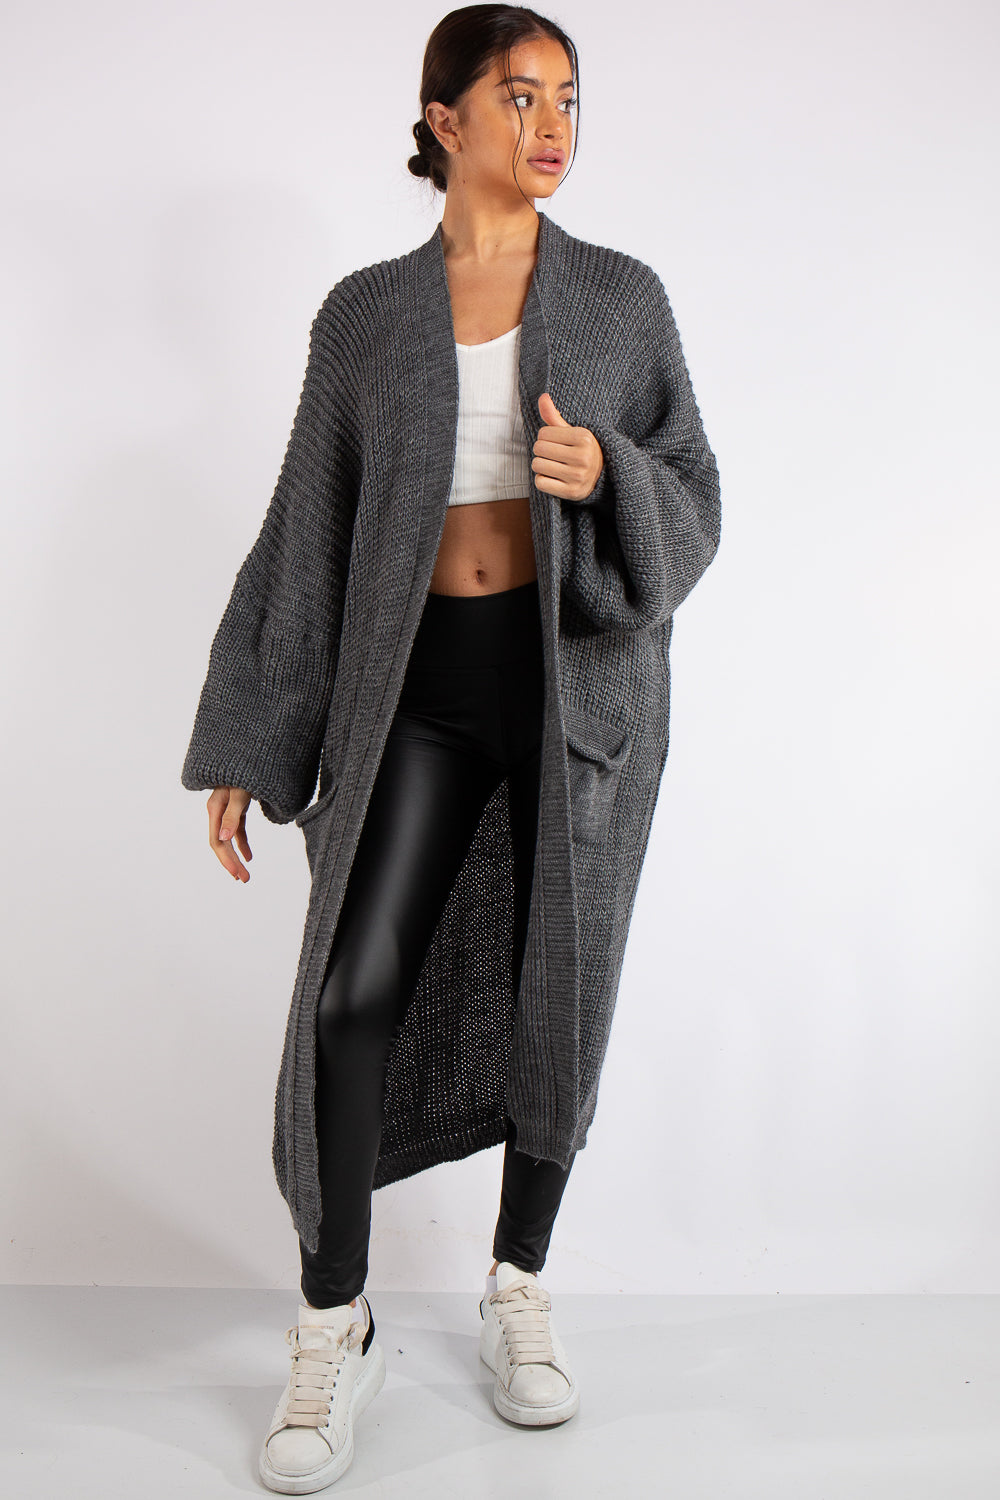 ASOS Longline Heavyweight Knitted Duster Cardigan in Charcoal